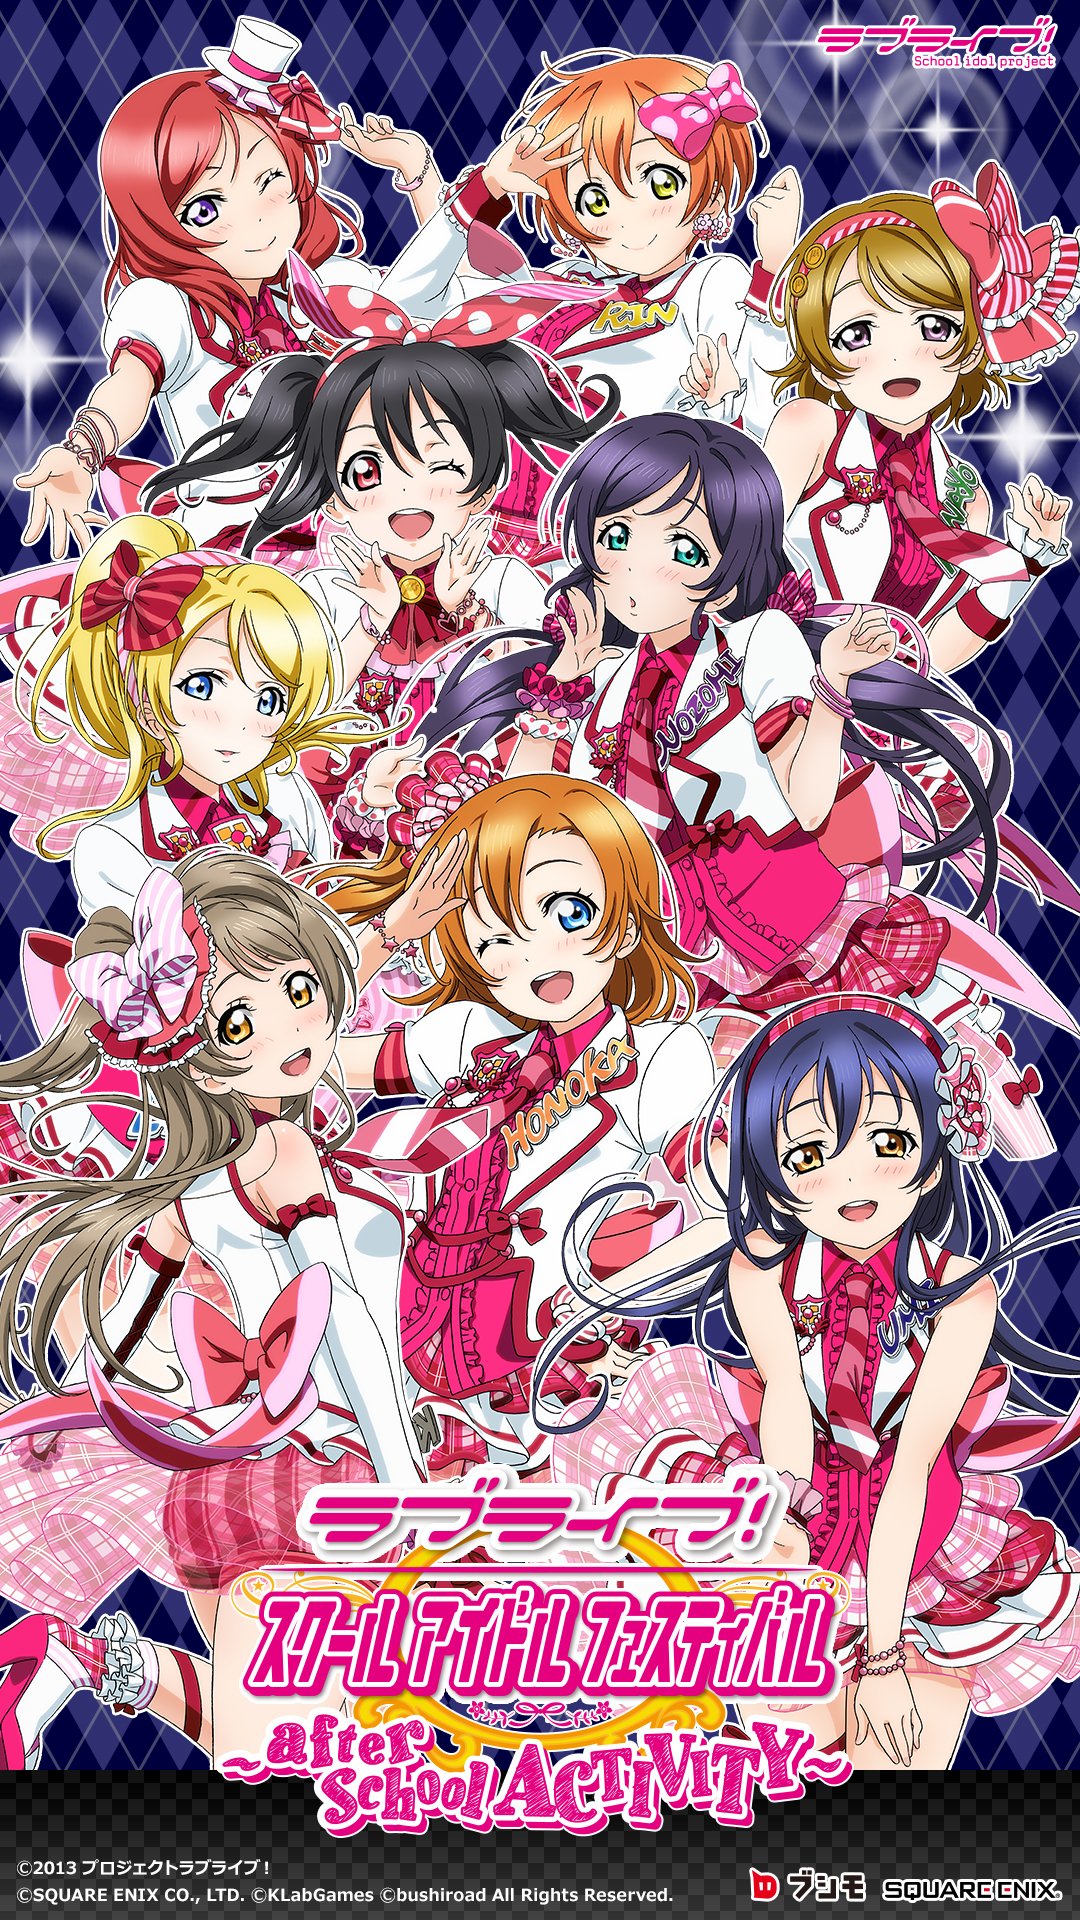 Image of Love Live! School idol festival ~after school ACTIVITY~